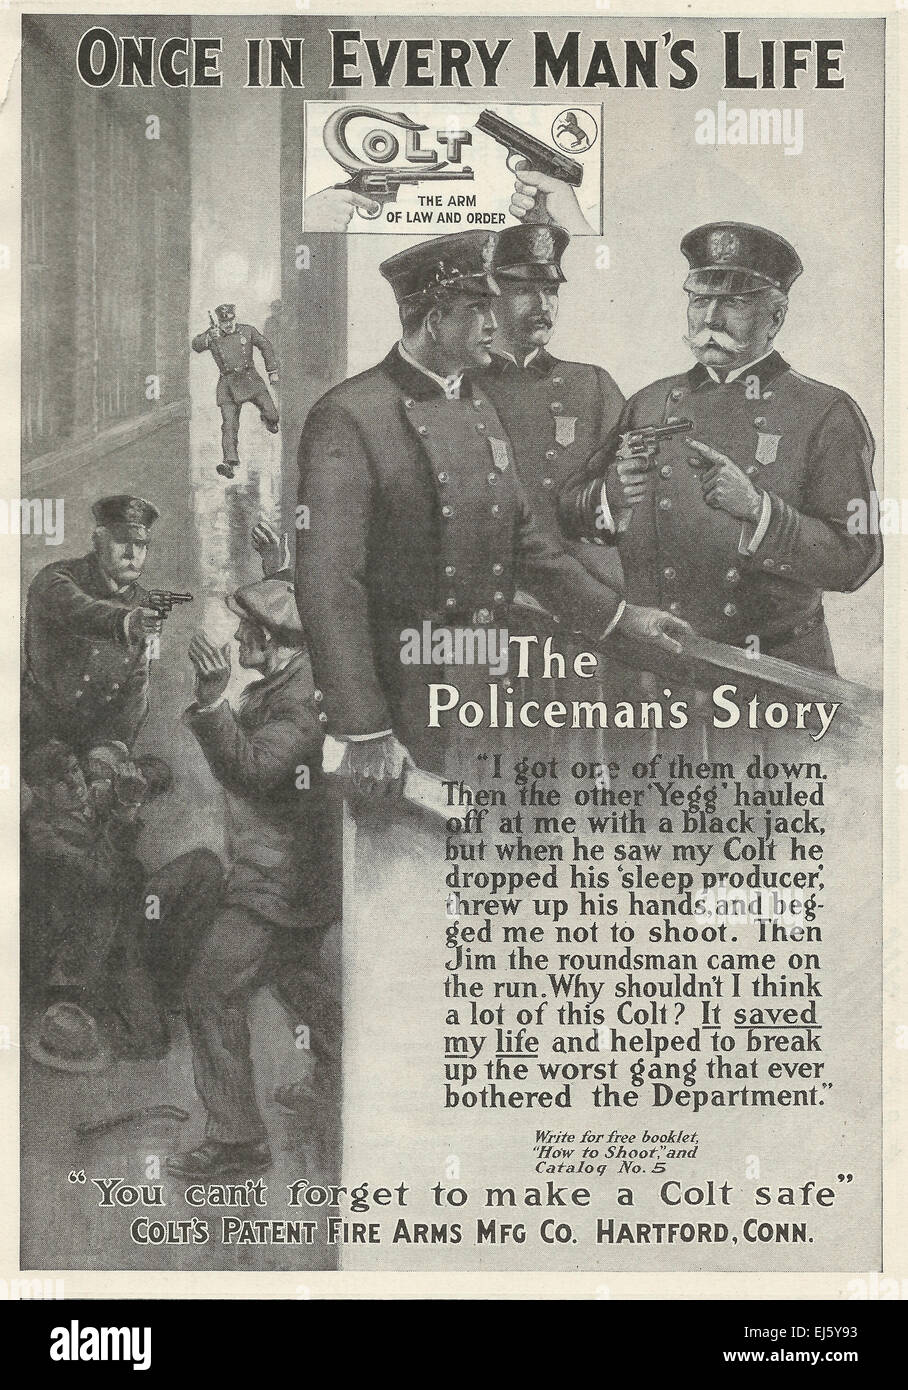 Once in Everyman's Life - The Policeman's Story - Colt Fire Arms Advertisement 1916 Stock Photo